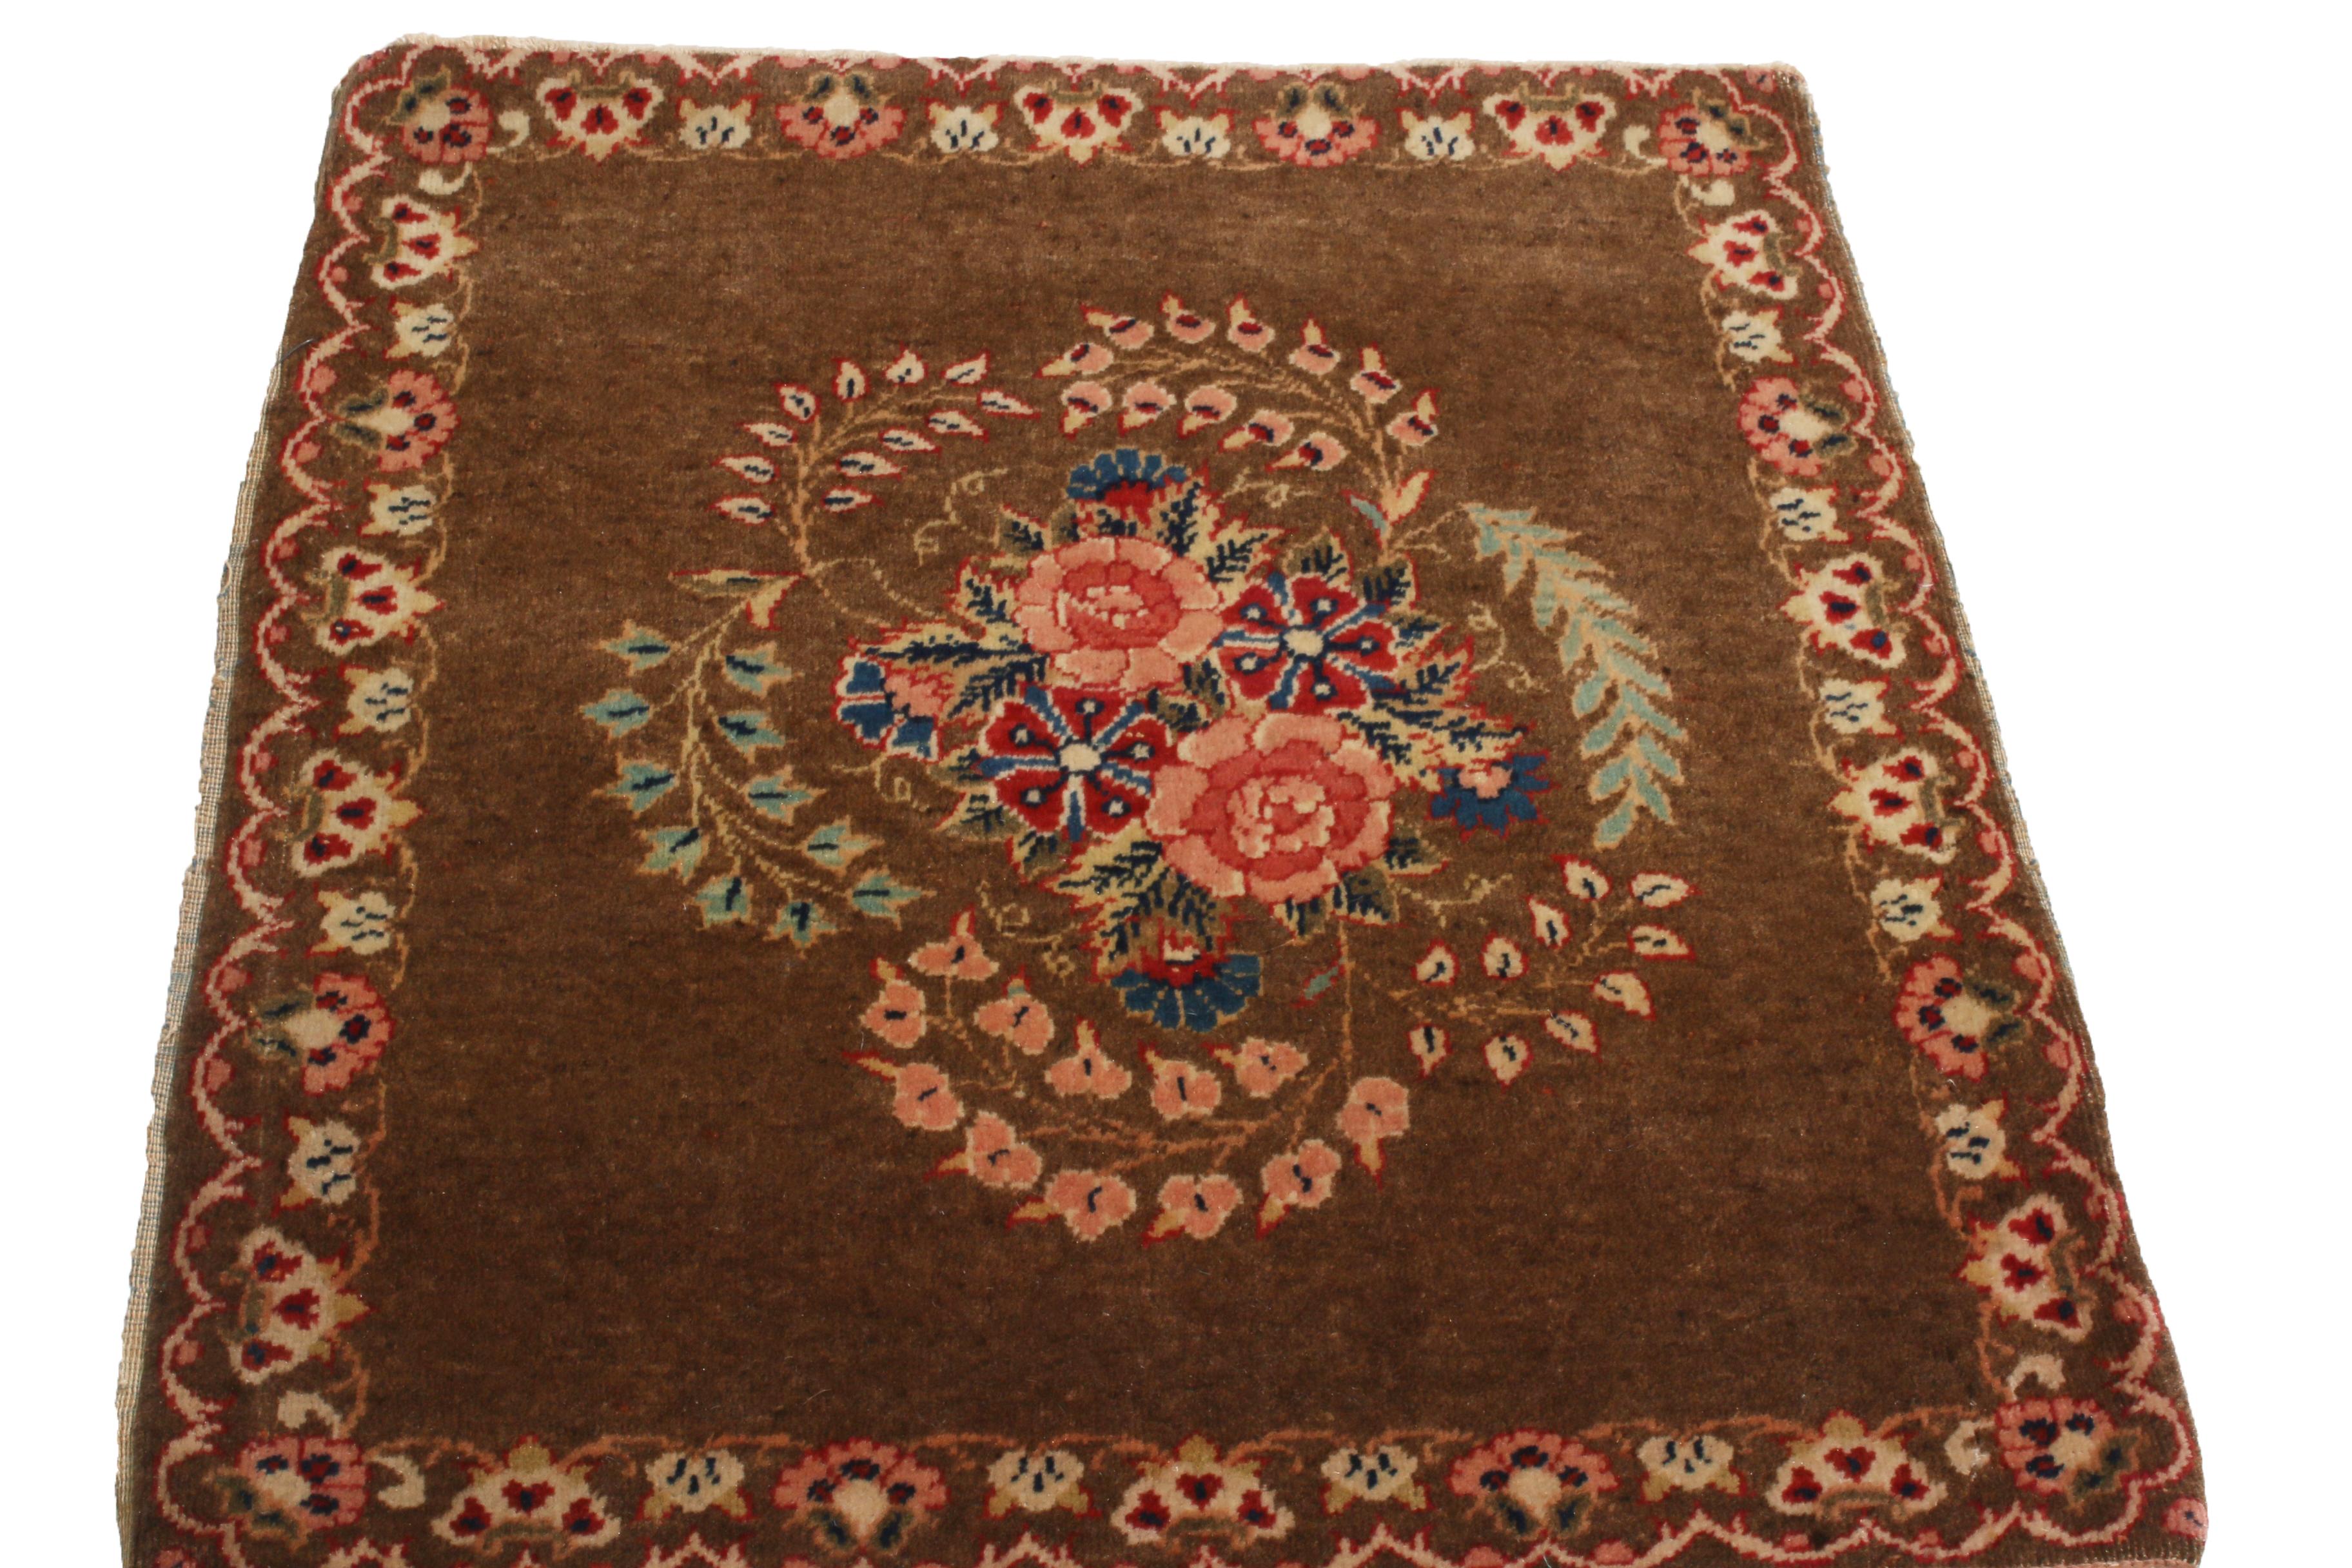 Originating from Persia in 1900, this hand-knotted wool antique Persian rug enjoys a distinguished classical combination of rich brown, vivid pink, and bright green colorways throughout an abrash field, complemented by highly stylized carnation